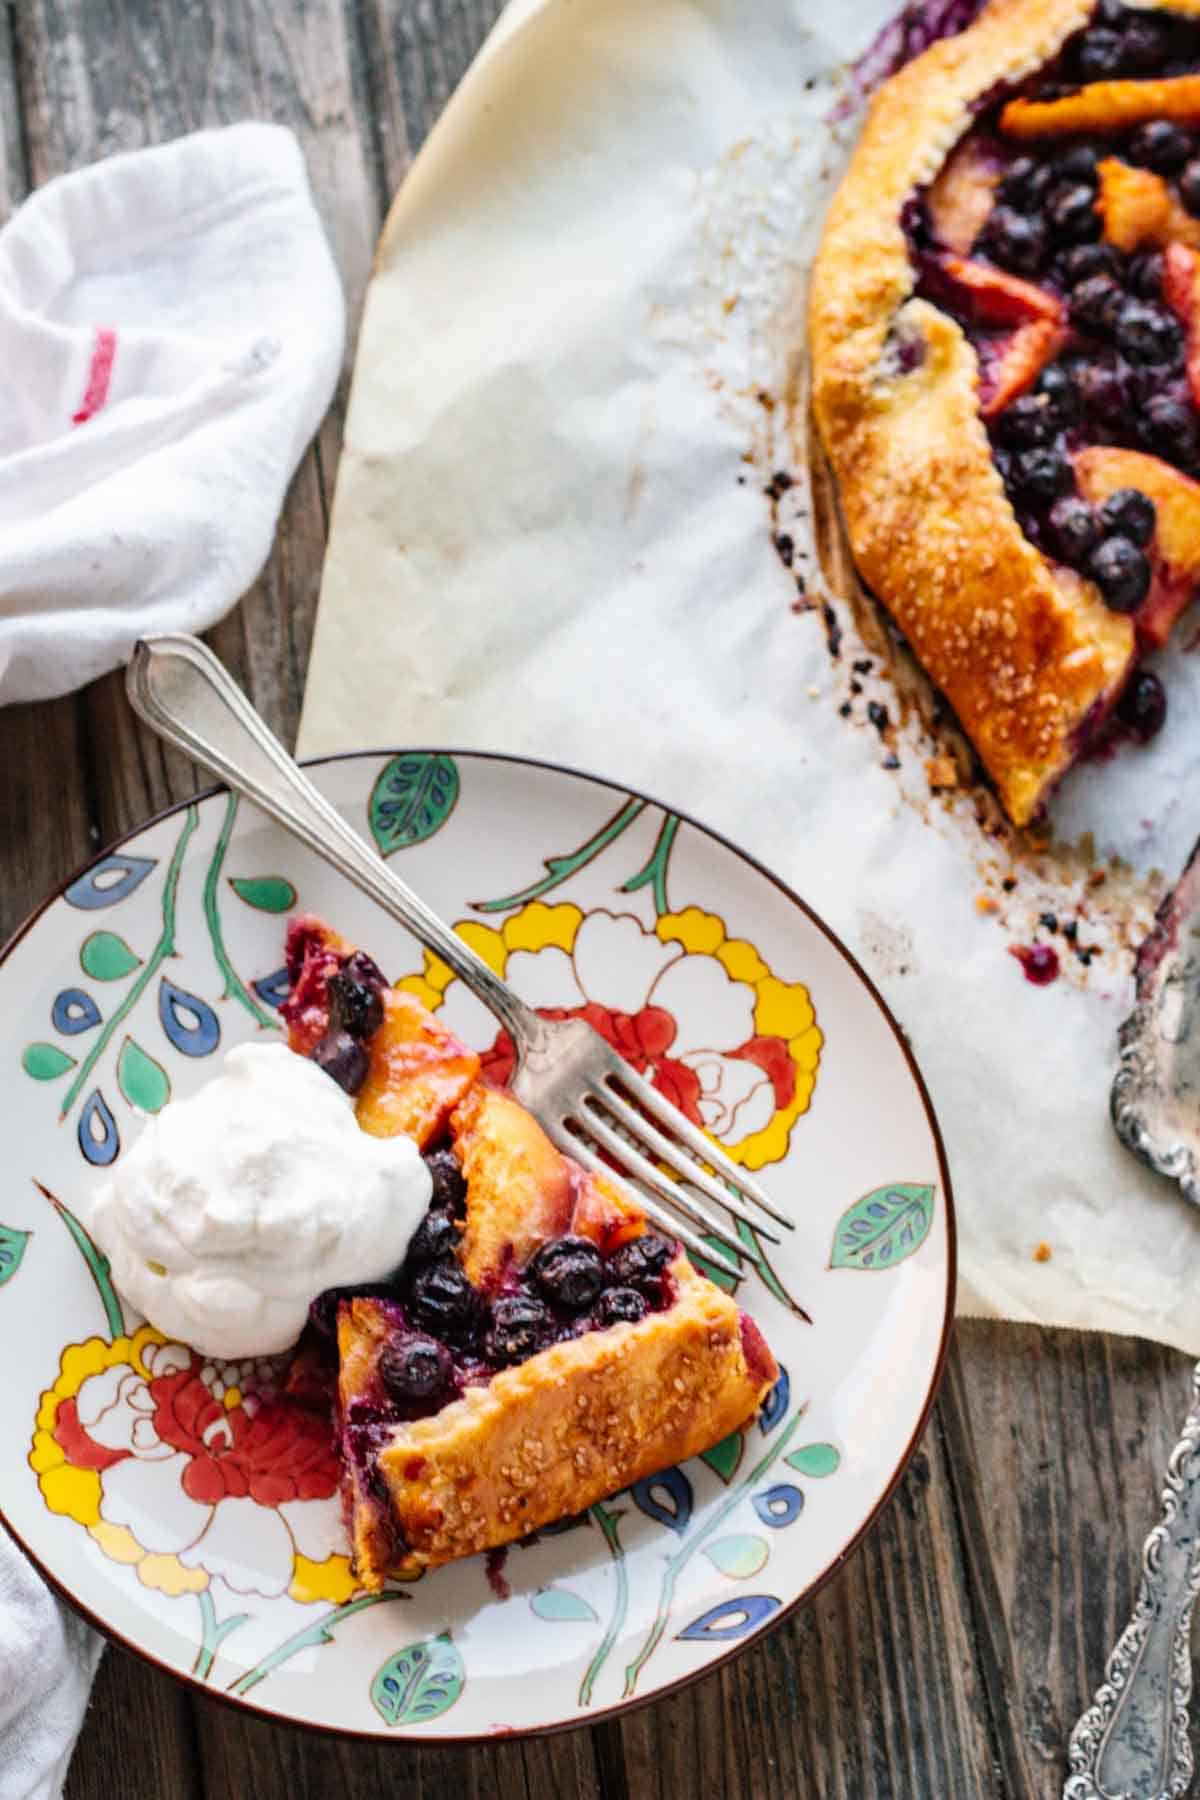 A slice of blueberry peach crostata on a plate with whipped cream and a fork.